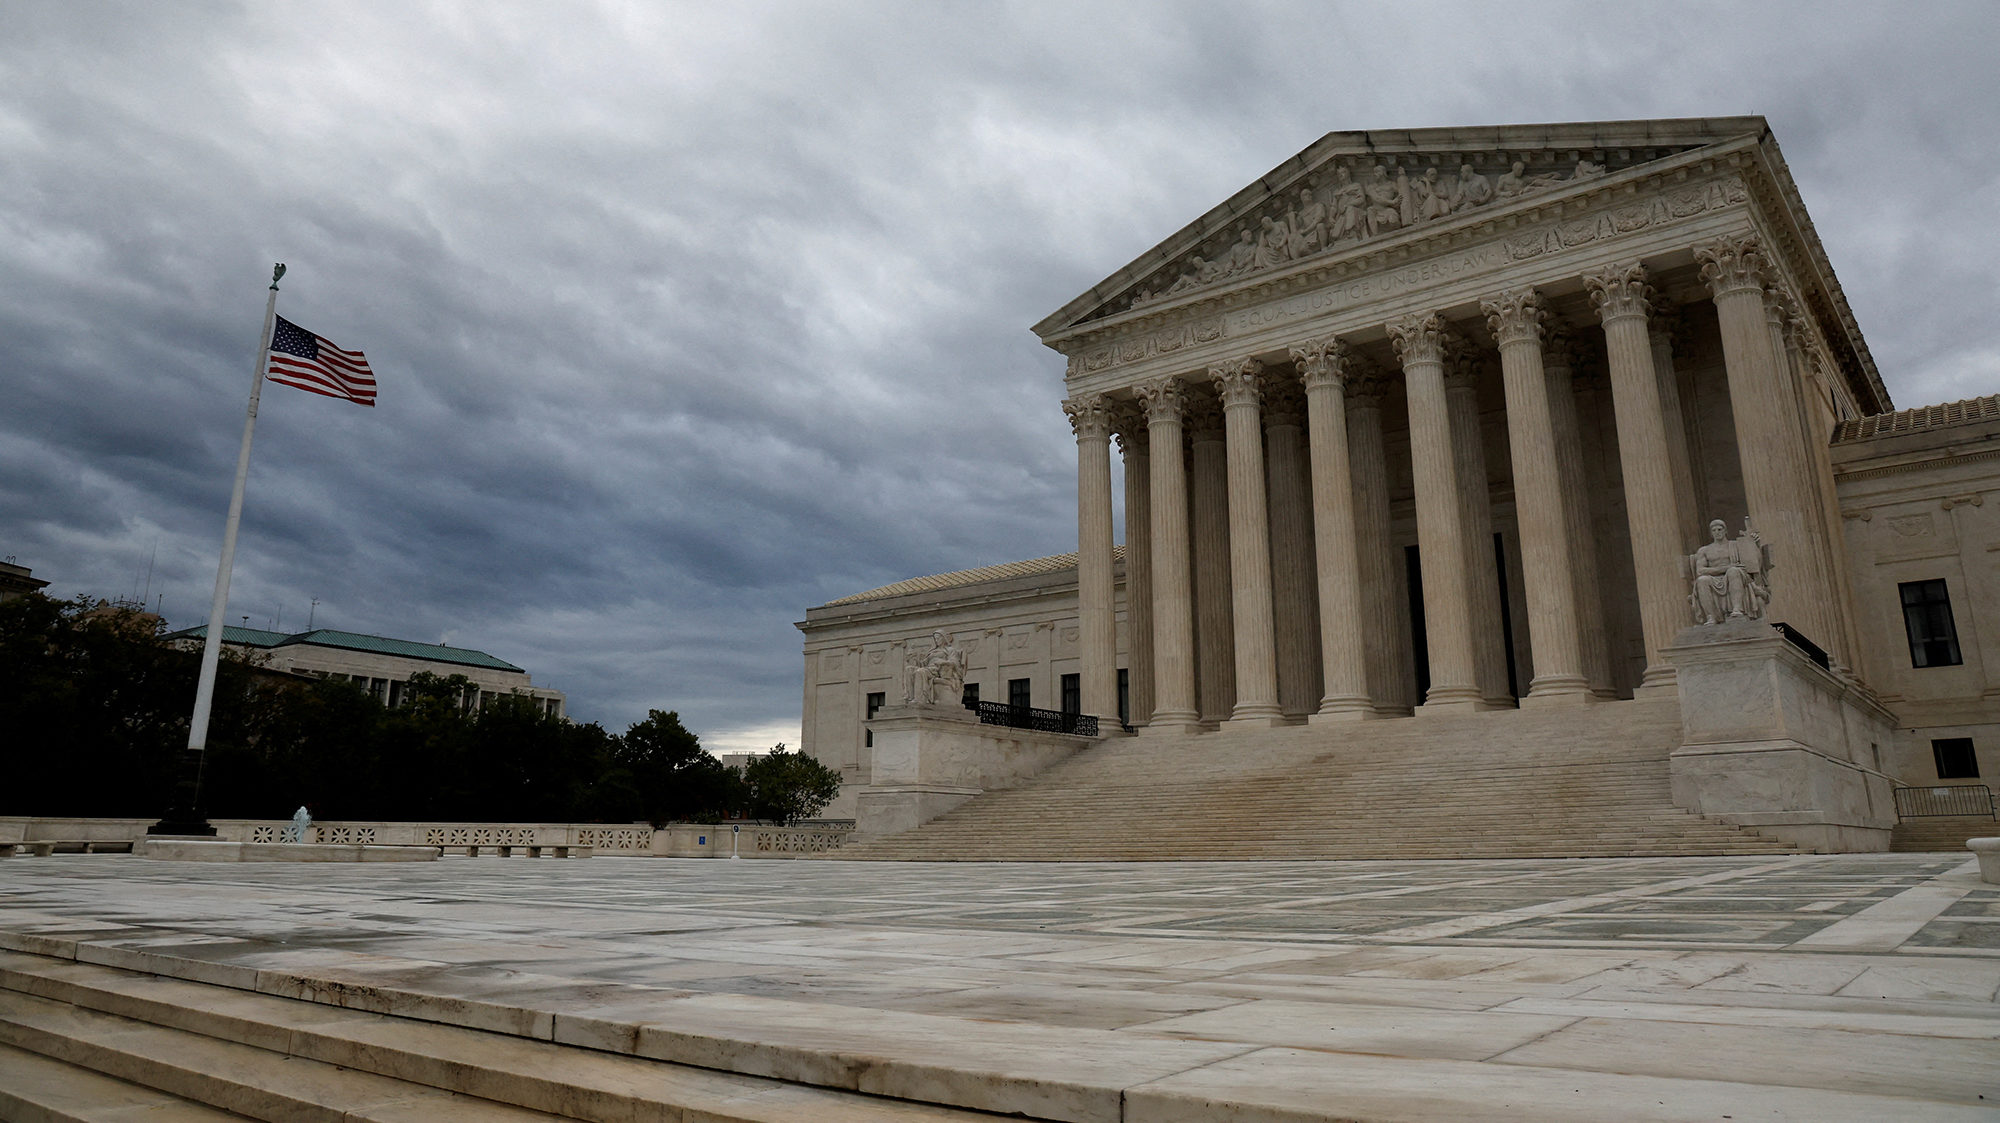 This week, the Supreme Court is set to hear oral arguments on two pivotal cases dealing with online...